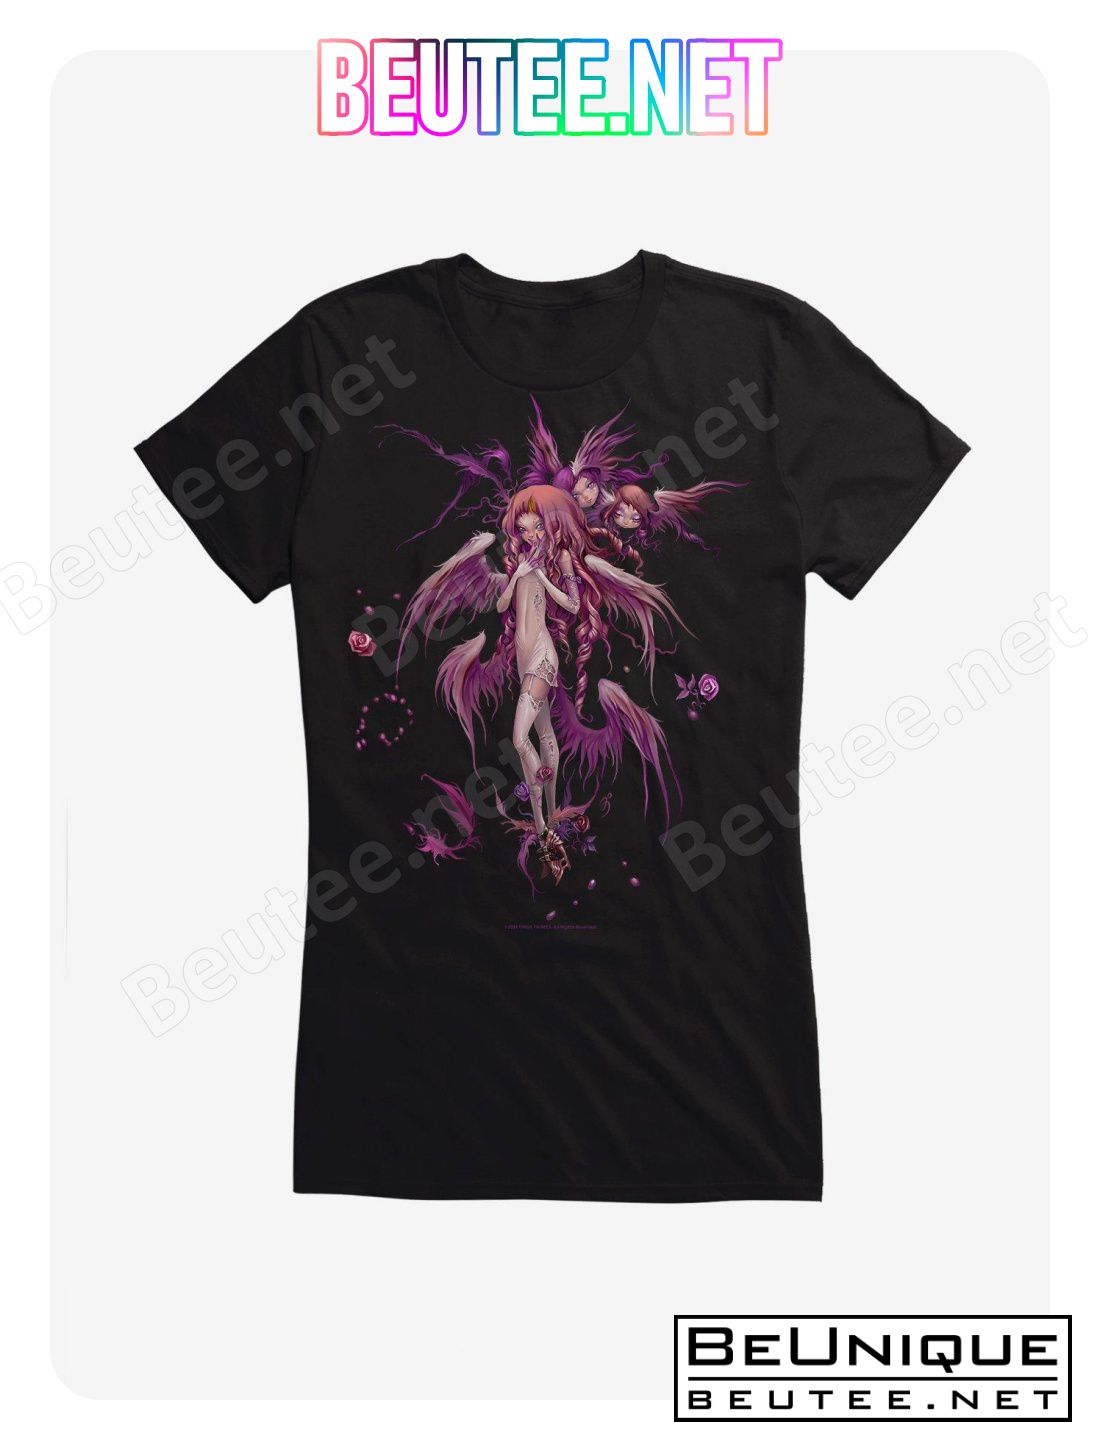 Fairies By Trick Night Time Fairy T-Shirt